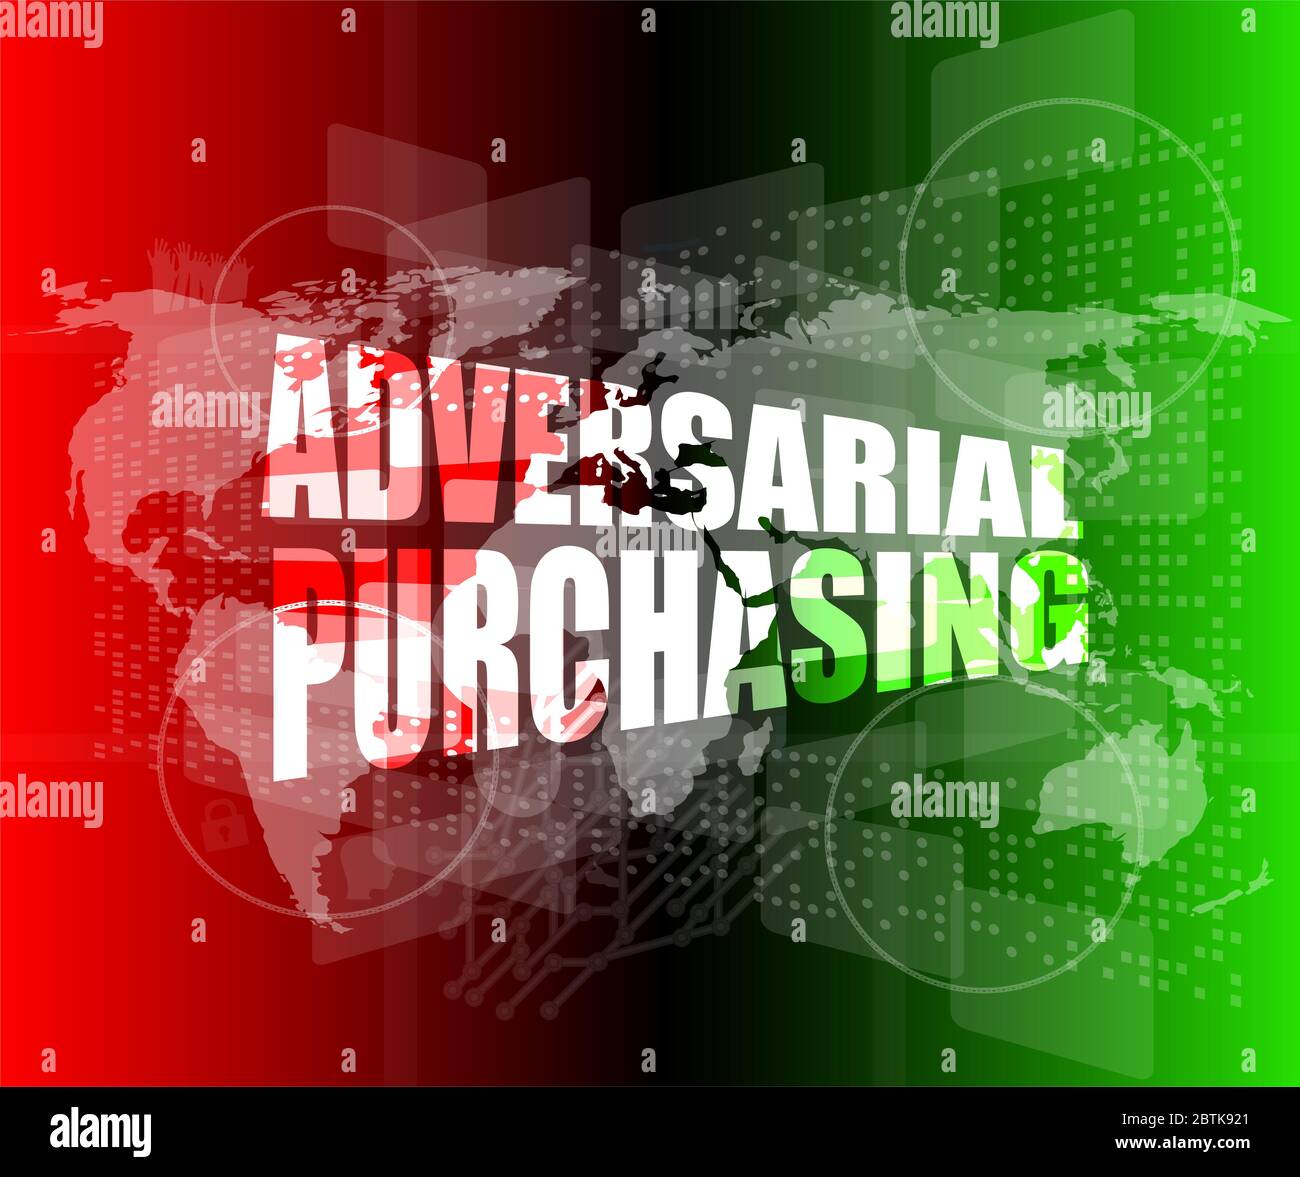 Backgrounds touch screen with adversarial purchasing words Stock Photo